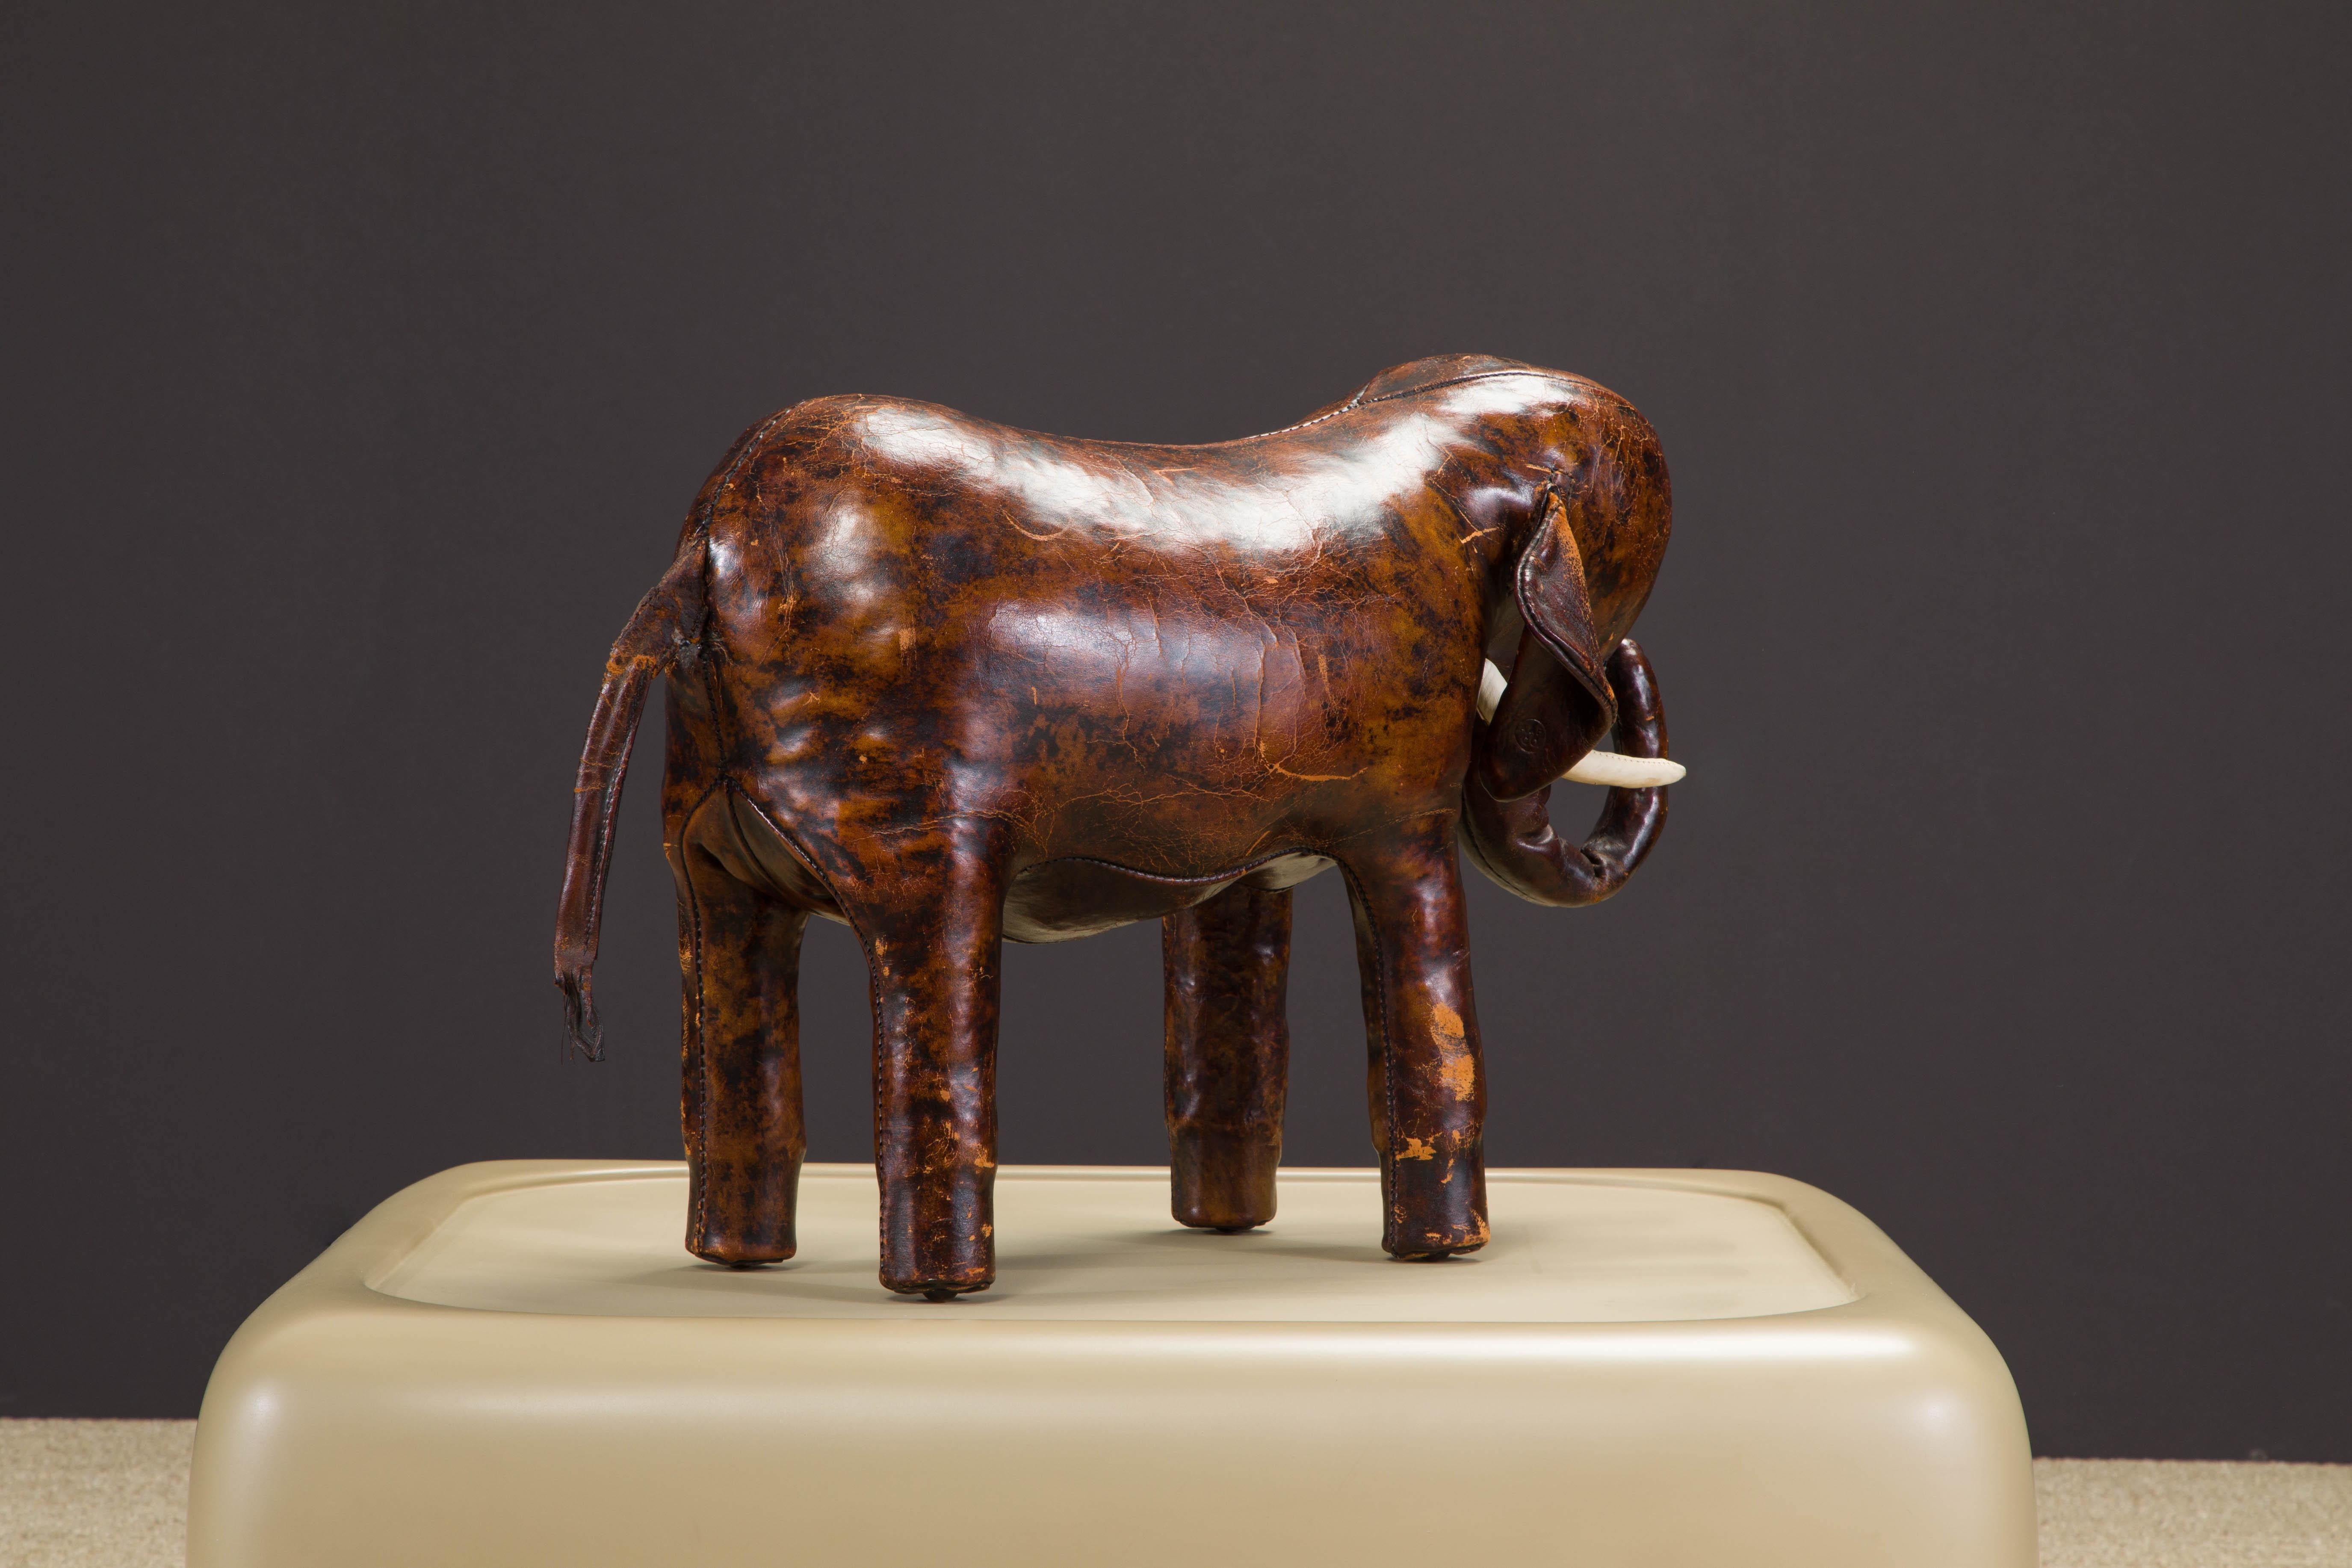 English Leather Elephant Stool by Dimitri Omersa for Abercrombie & Fitch, c 1963, Signed